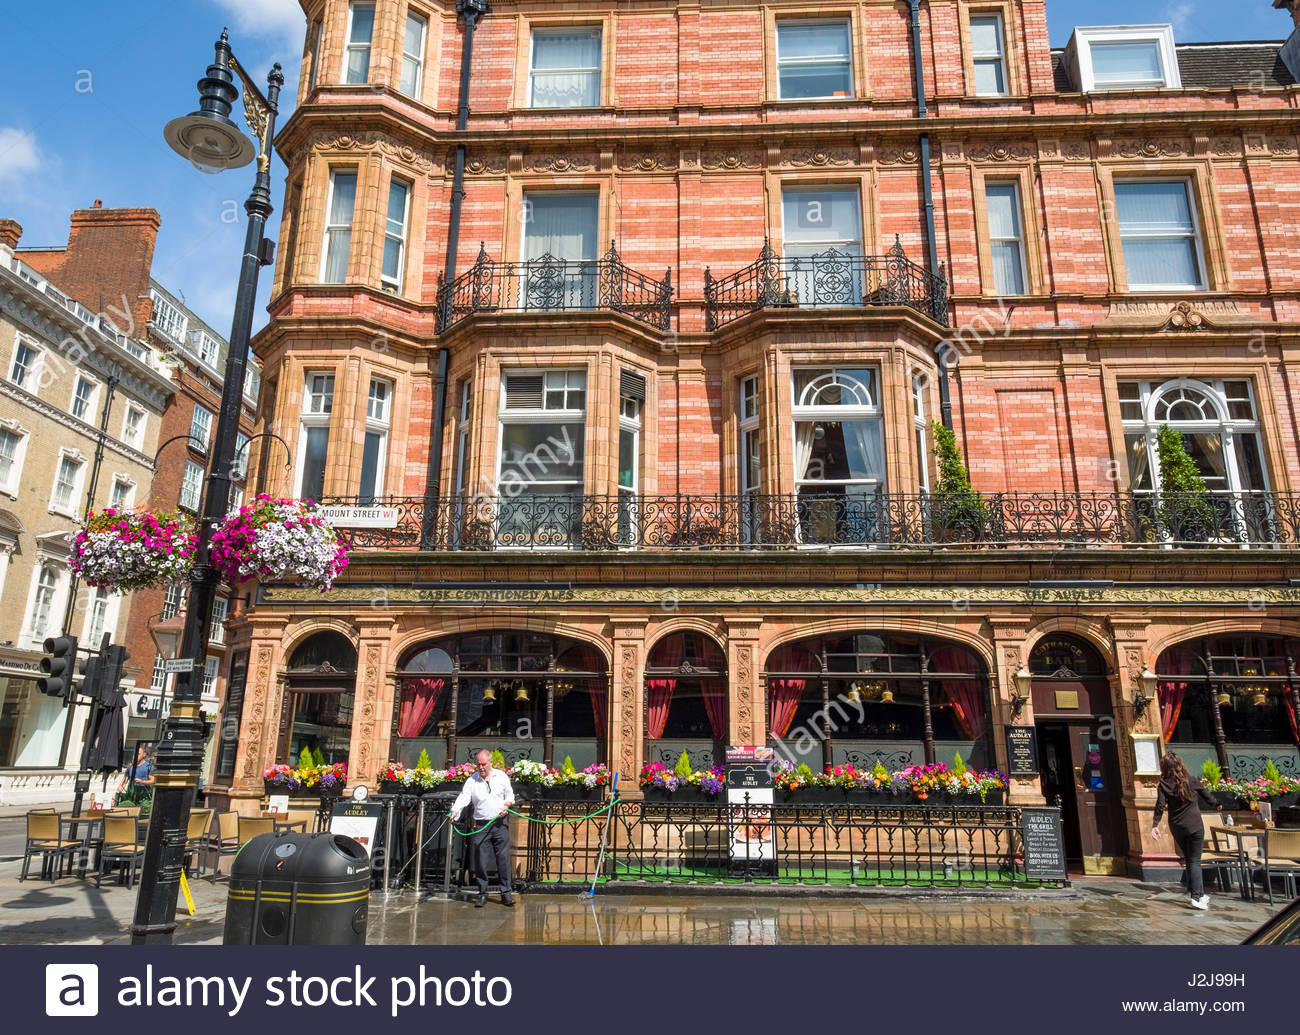 Audley Pub High Resolution Stock Photography and Images - Alamy